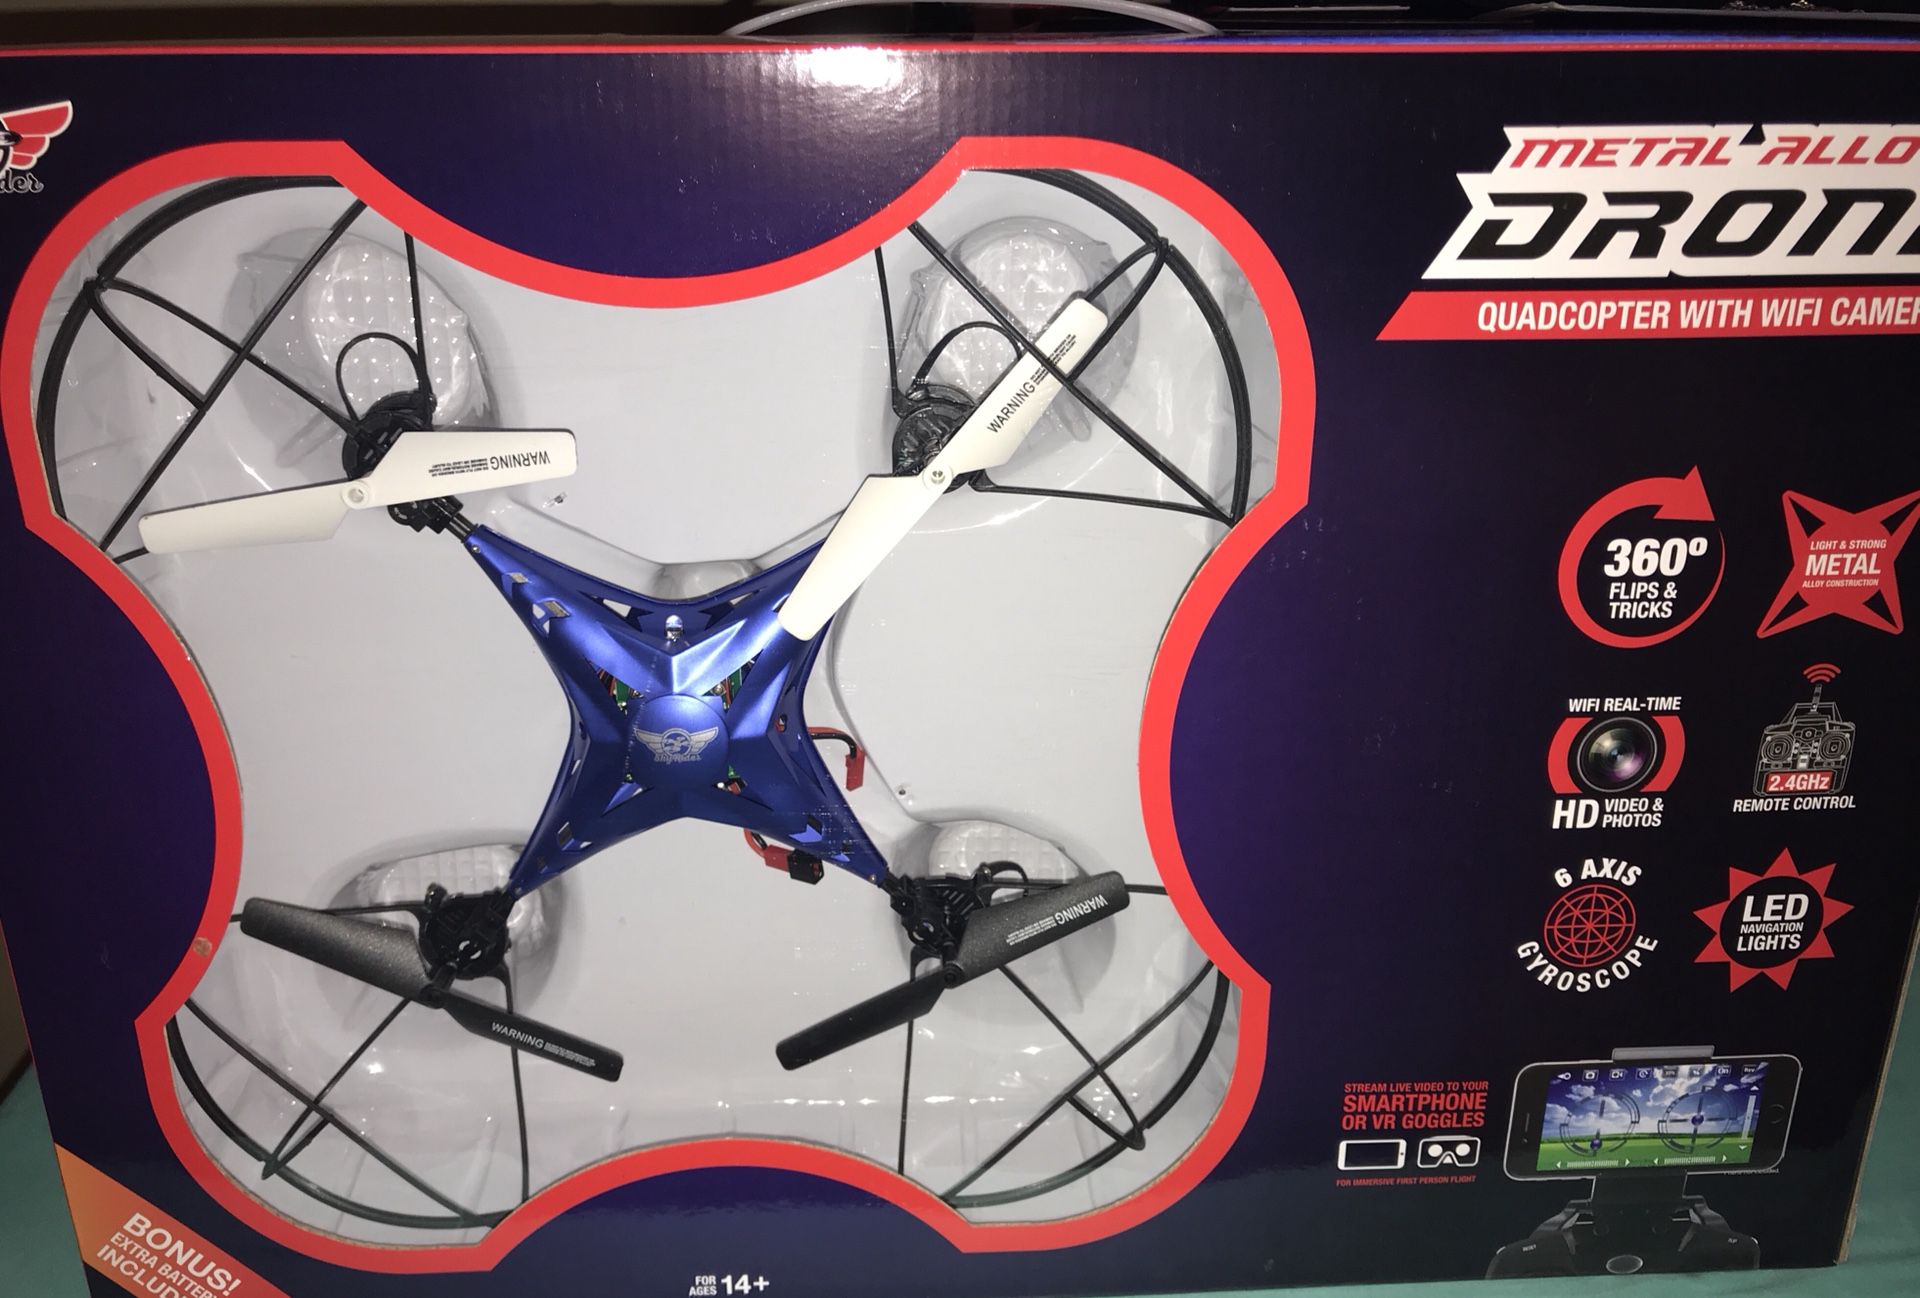 Sky Rider Metal Alloy Drone Quadcopter with WIFI Camaraderie